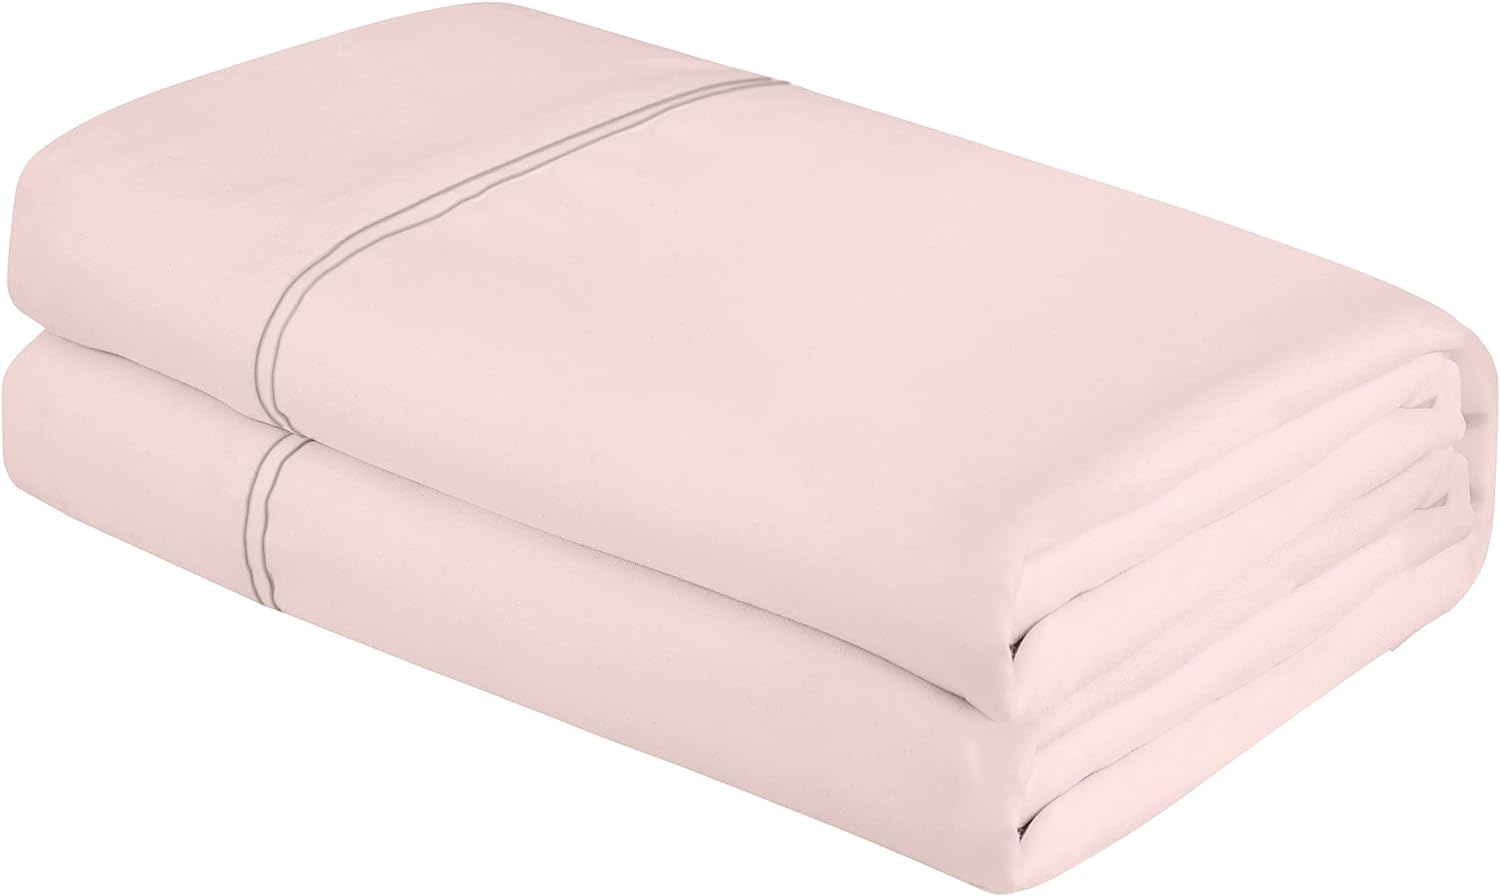 Royale Linens King Size Flat Sheet Only - Brushed 1800 Microfiber - Ultra Soft & Breathable - Wrinkle & Stain Resistant - Hotel Quality Flat Sheet Sold Separately - Top Sheet for Bed - (King, Pink)